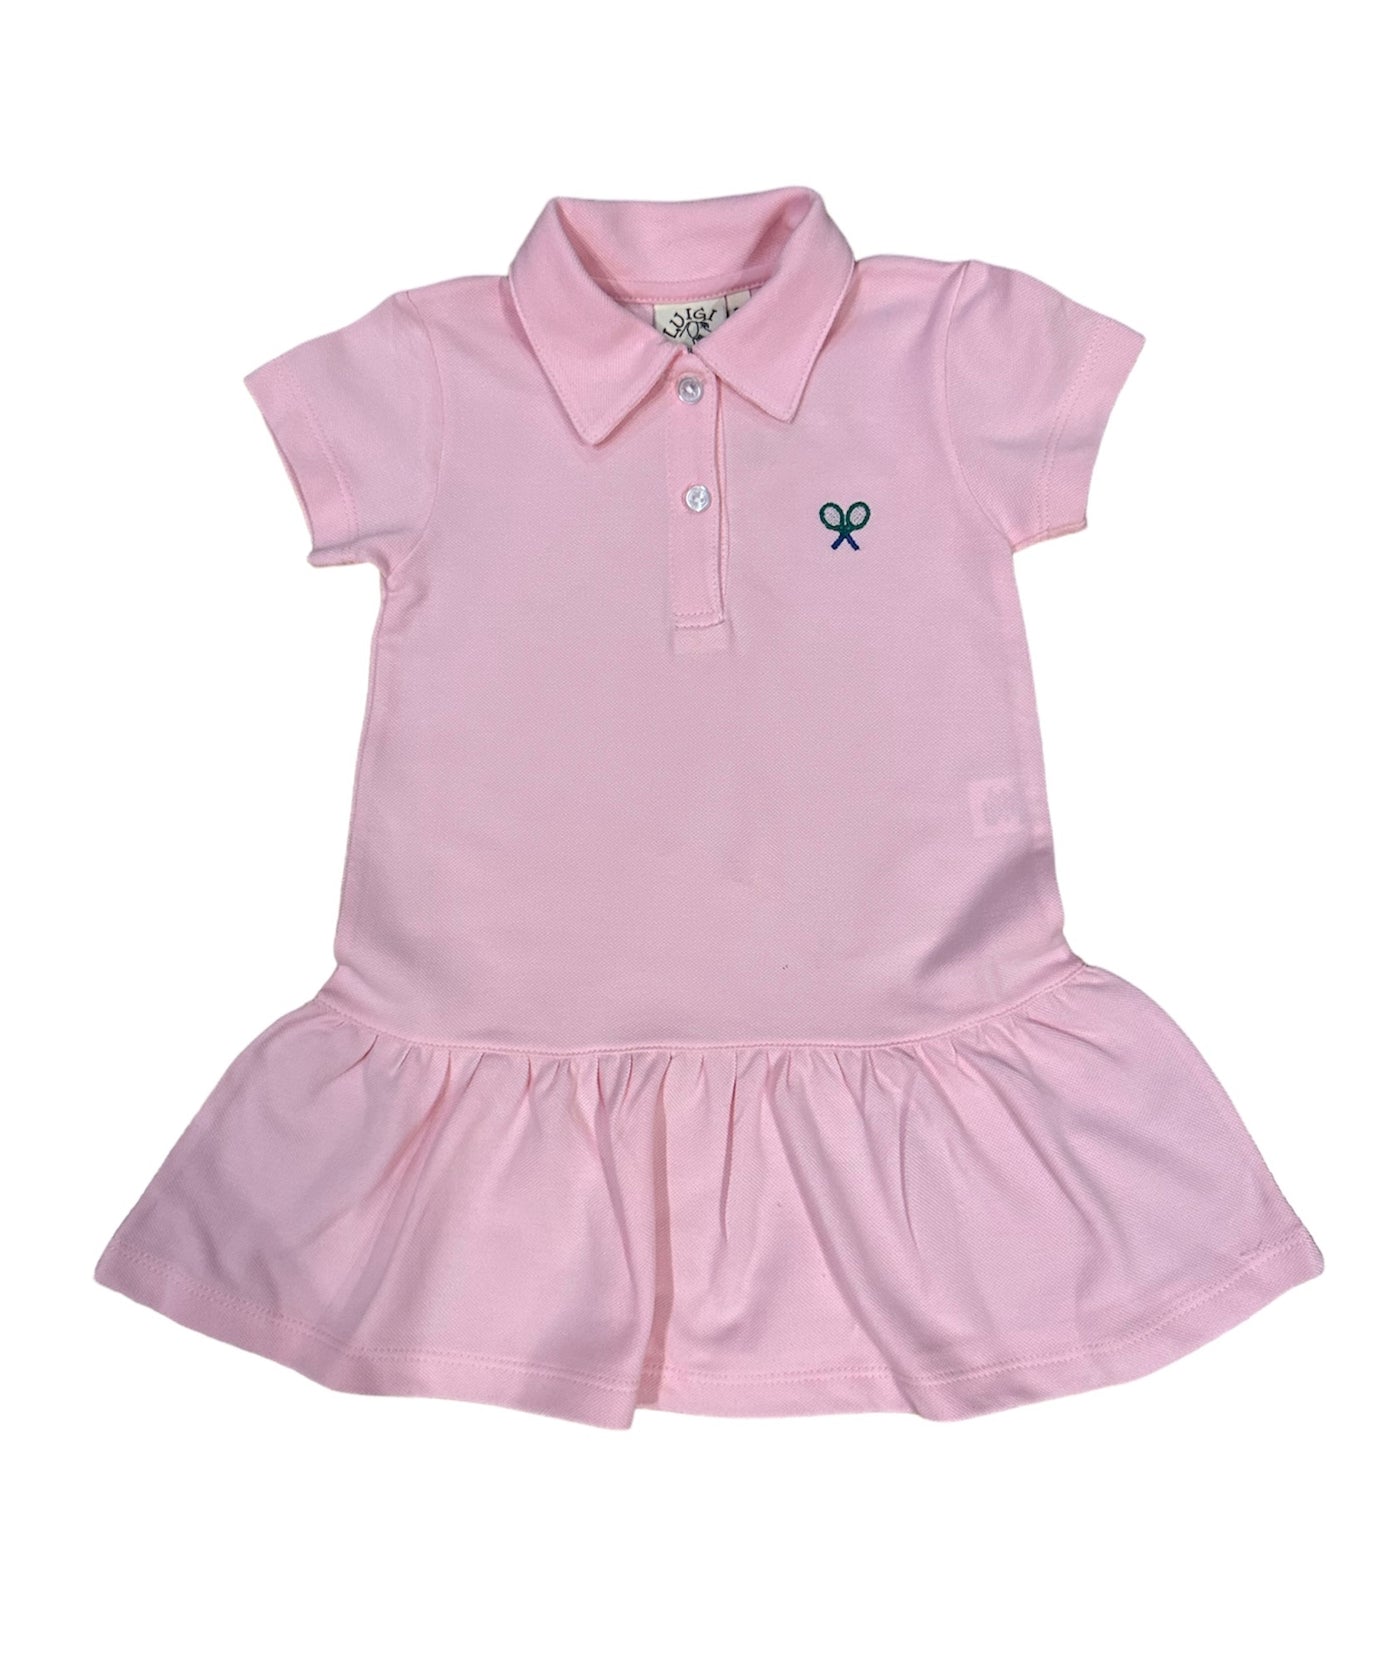 Pique Pink Polo Tennis Dress with Tennis Racquets Embroidery